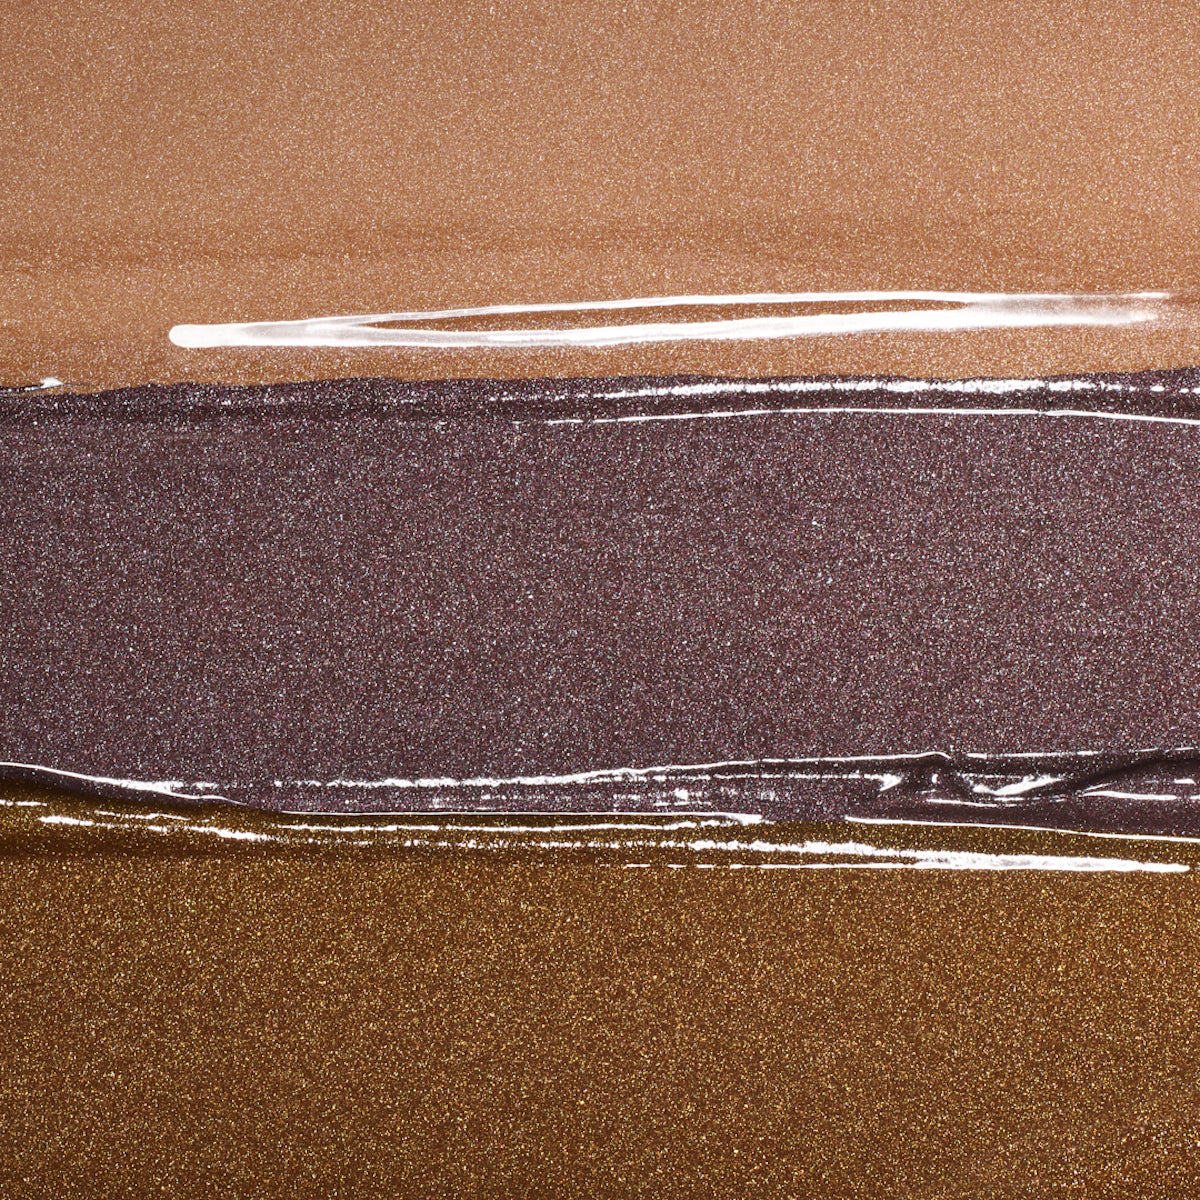 SATOU UME - SUGARED PLUM - eye gloss in sugared plum, melted chocolate and glistening sand shades